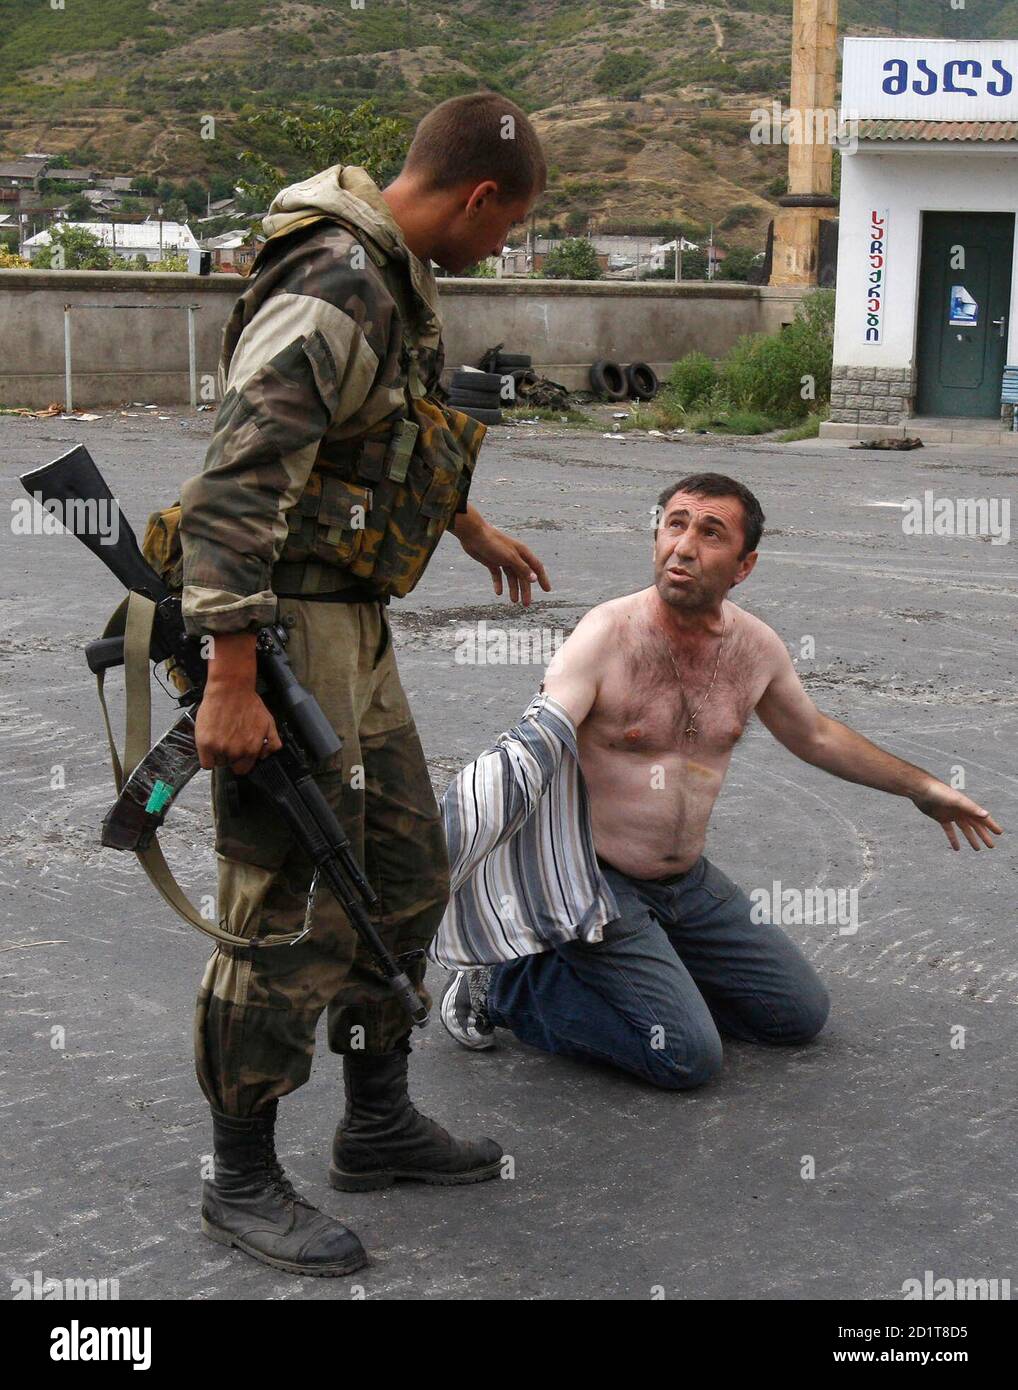 Russian soldiers detain a man who carried a weapon in his car at a checkpoint in the Georgian city of Gori, near South Ossetia, August 14, 2008. Russian President Dmitry Medvedev pledged support on Thursday for two separatist regions fighting for independence from Georgia, as Washington demanded that the war-torn country's territorial integrity be respected. REUTERS/Gleb Garanich (GEORGIA) Stock Photo